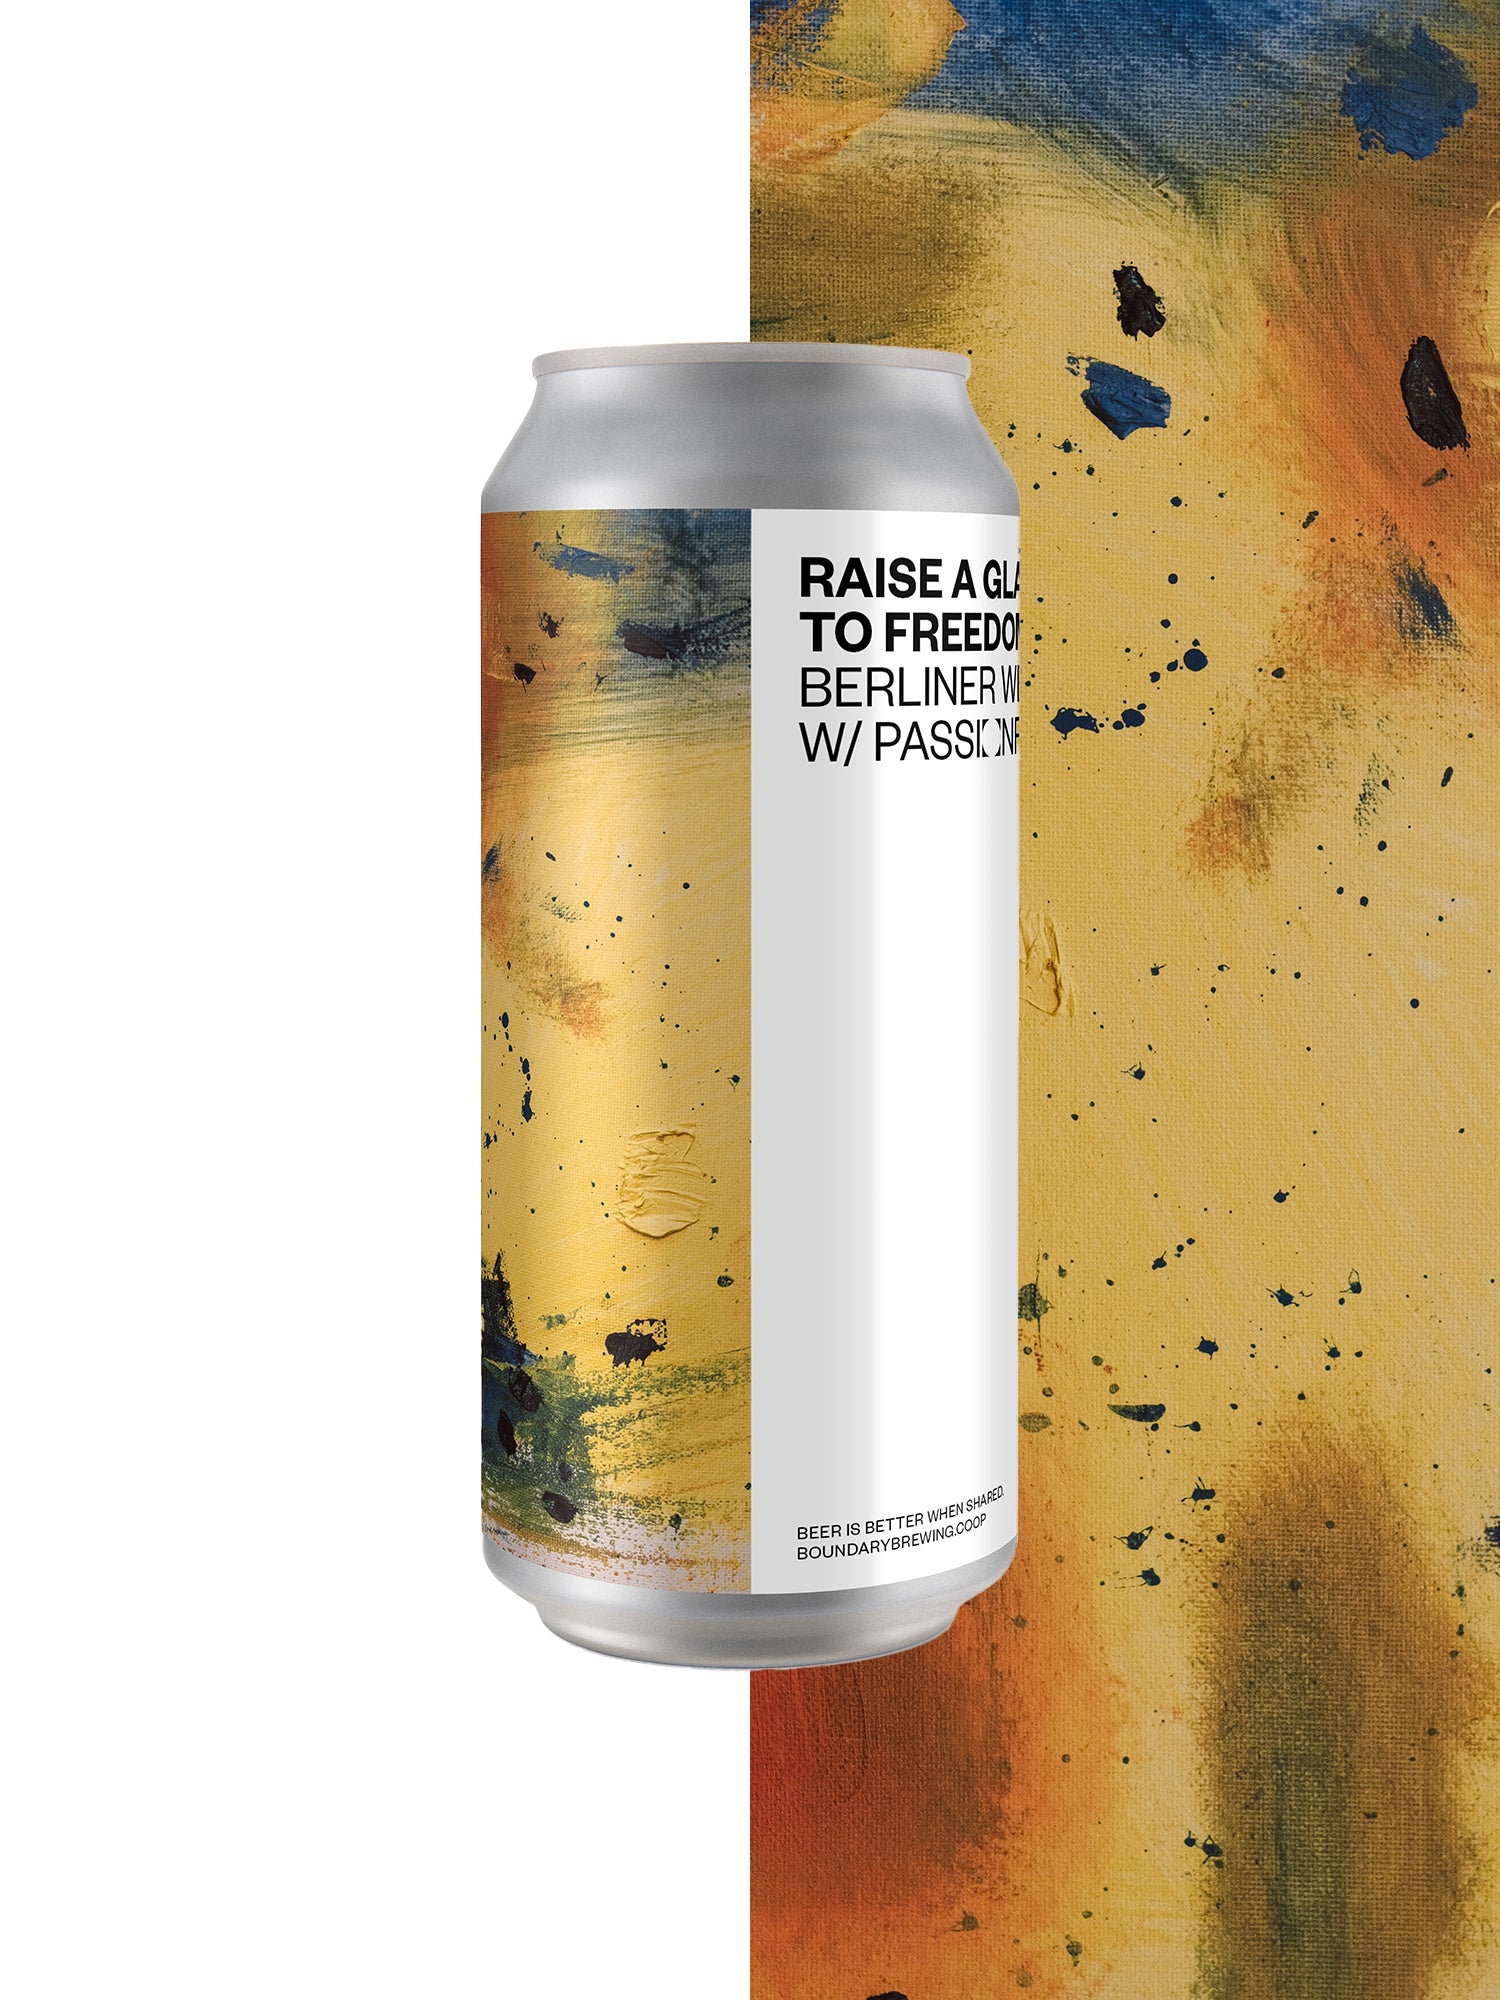 RAISE A GLASS TO FREEDOM Passionfruit Berliner Weisse (4-pack) 4.7%